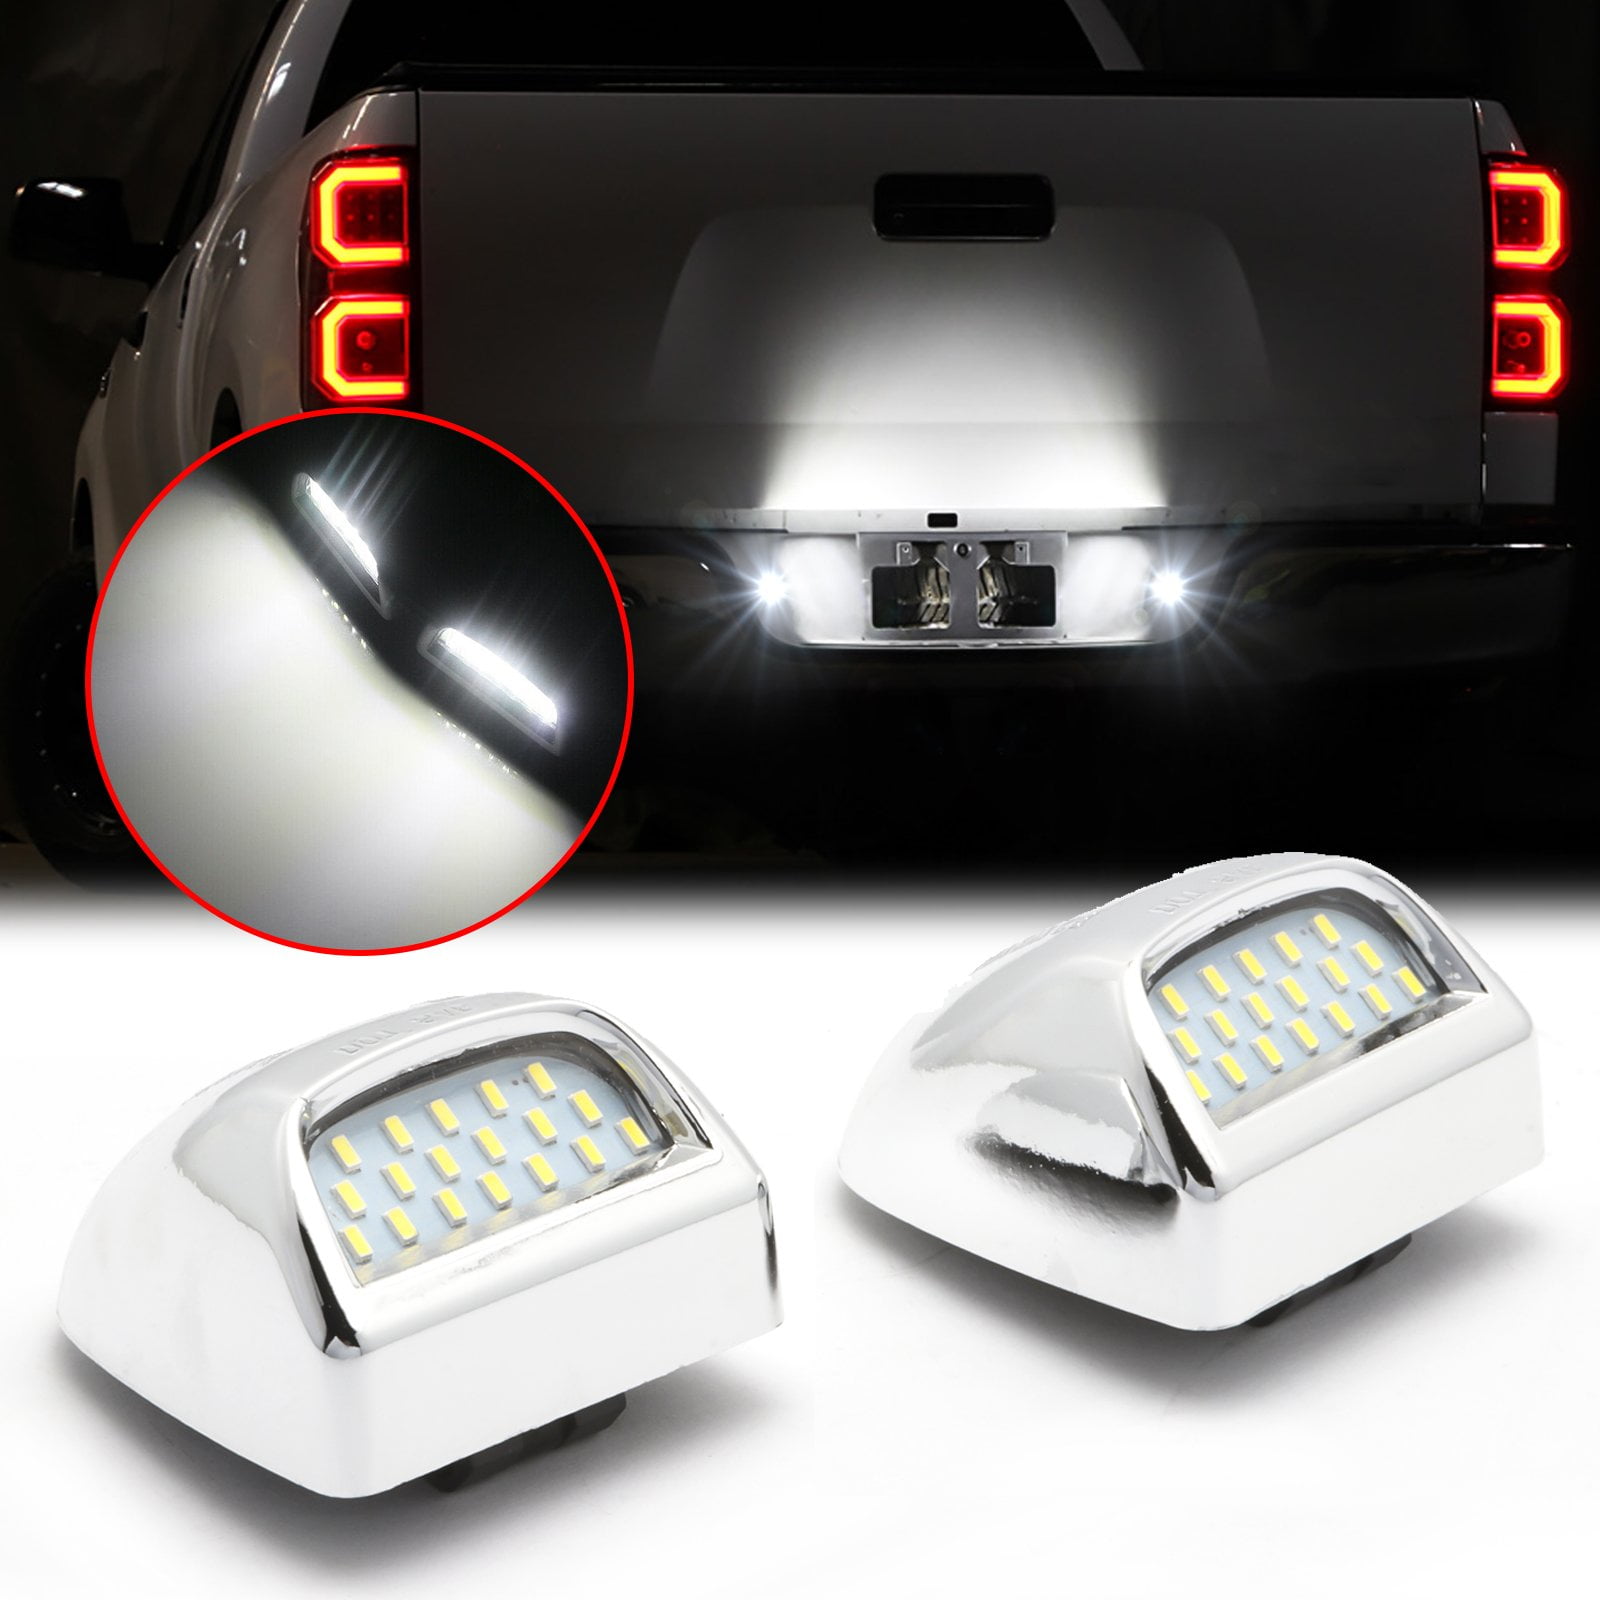 Xotic Tech White LED License Plate Light Tag Lamp Assembly Housing Pair  Replacement For Chevy Silverado GMC Sierra 1500 2500 3500 Suburban Tahoe  Yukon